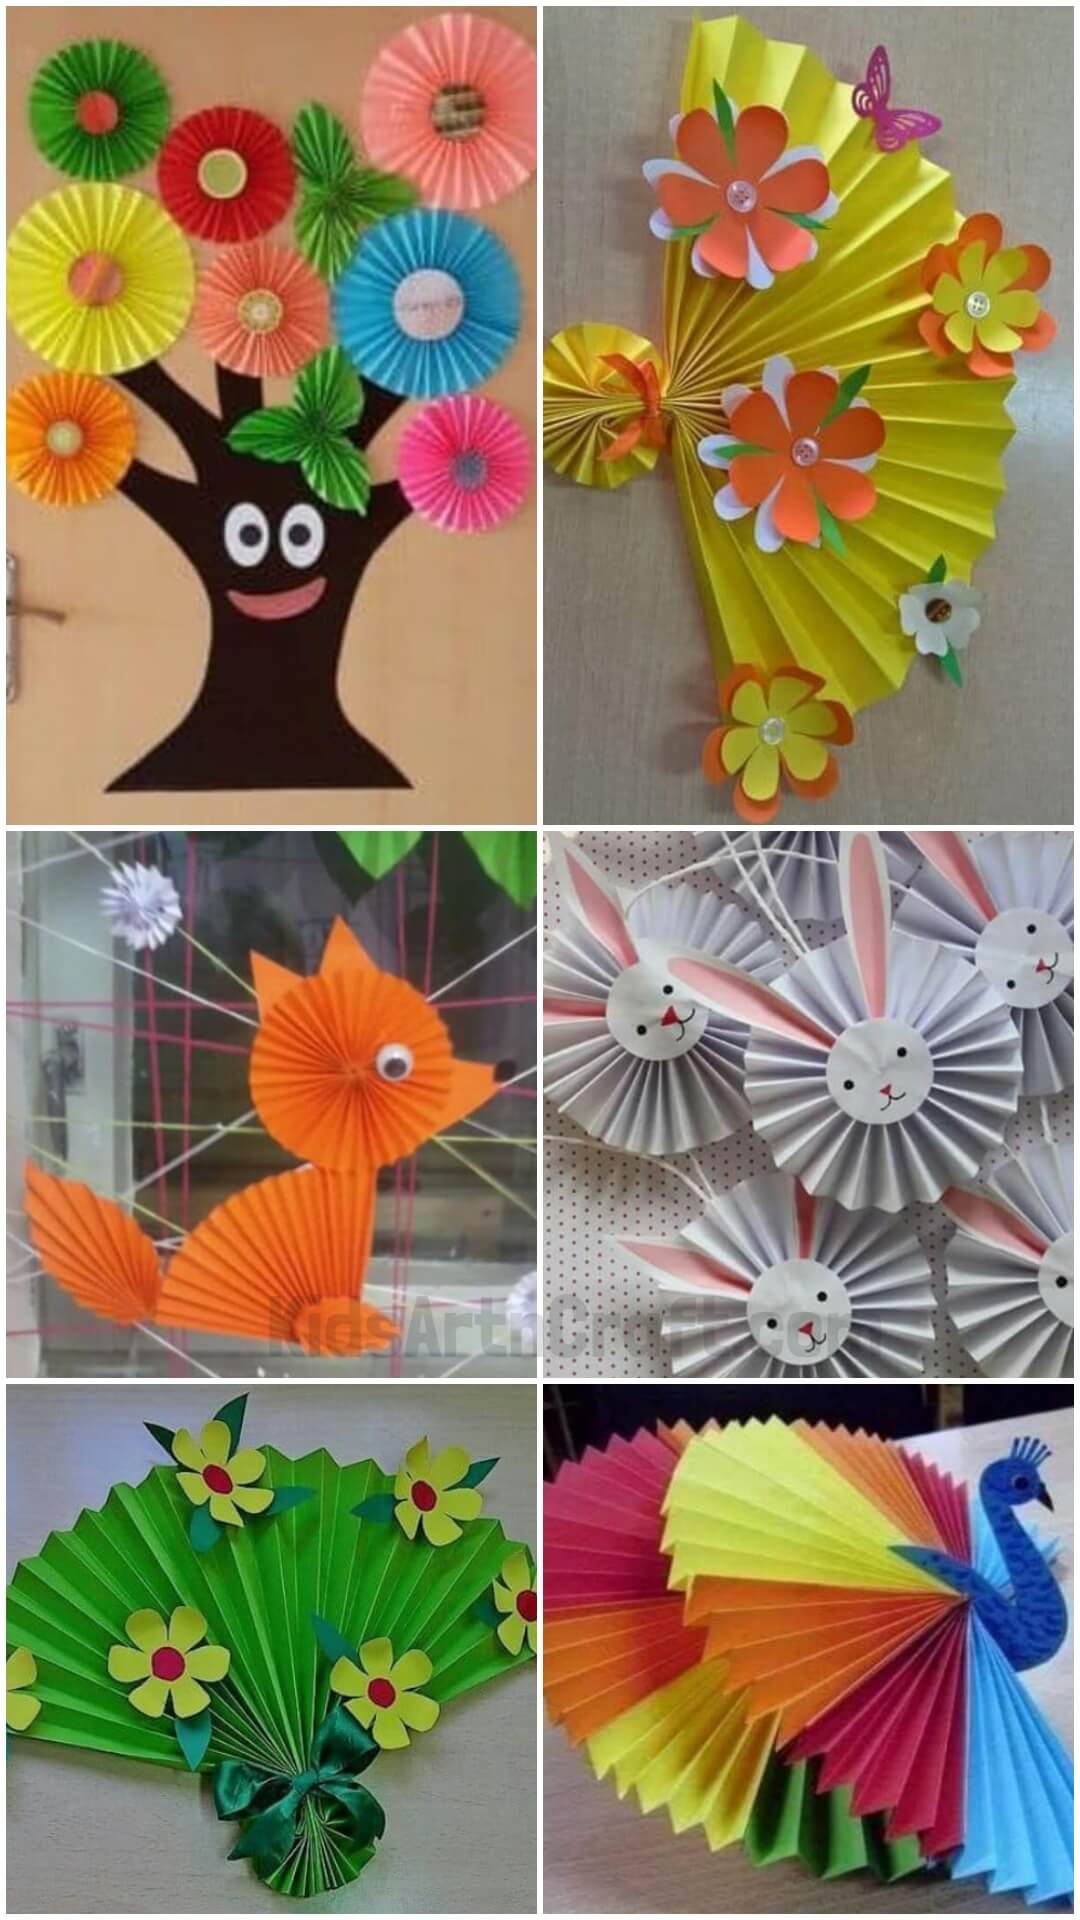 Accordion Paper Craft Ideas for Kids